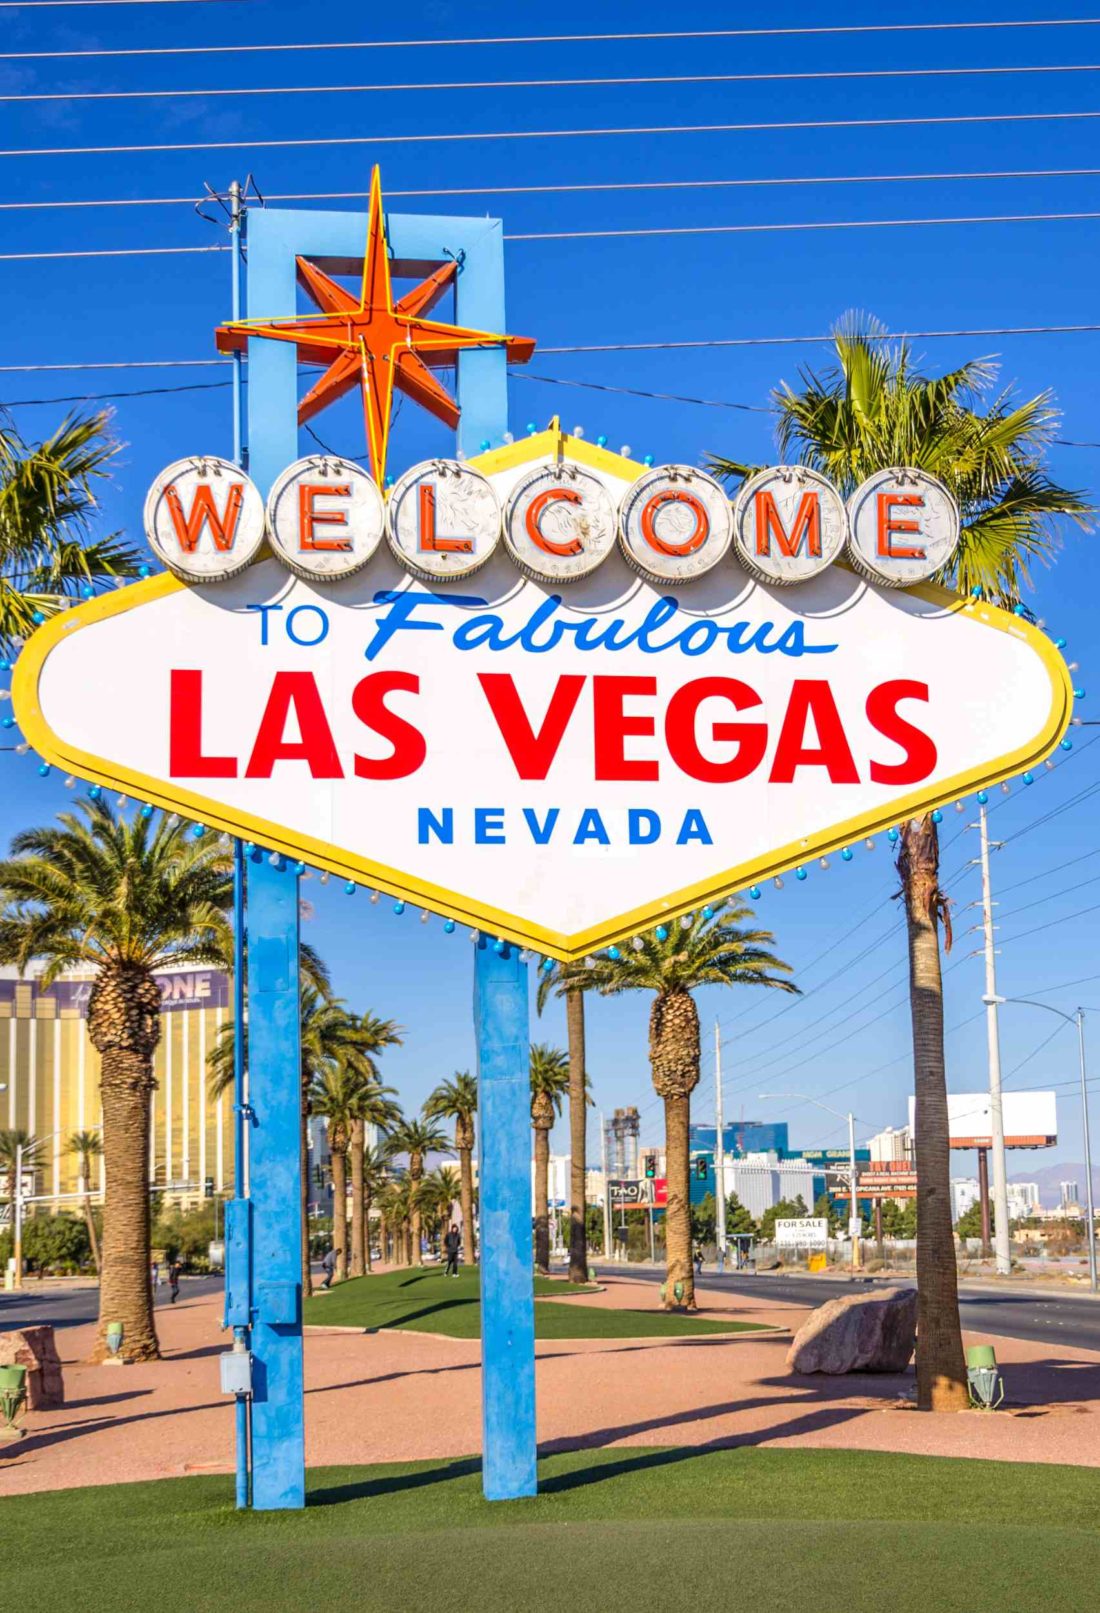 A Day in the Life: Exploring Las Vegas with Kids